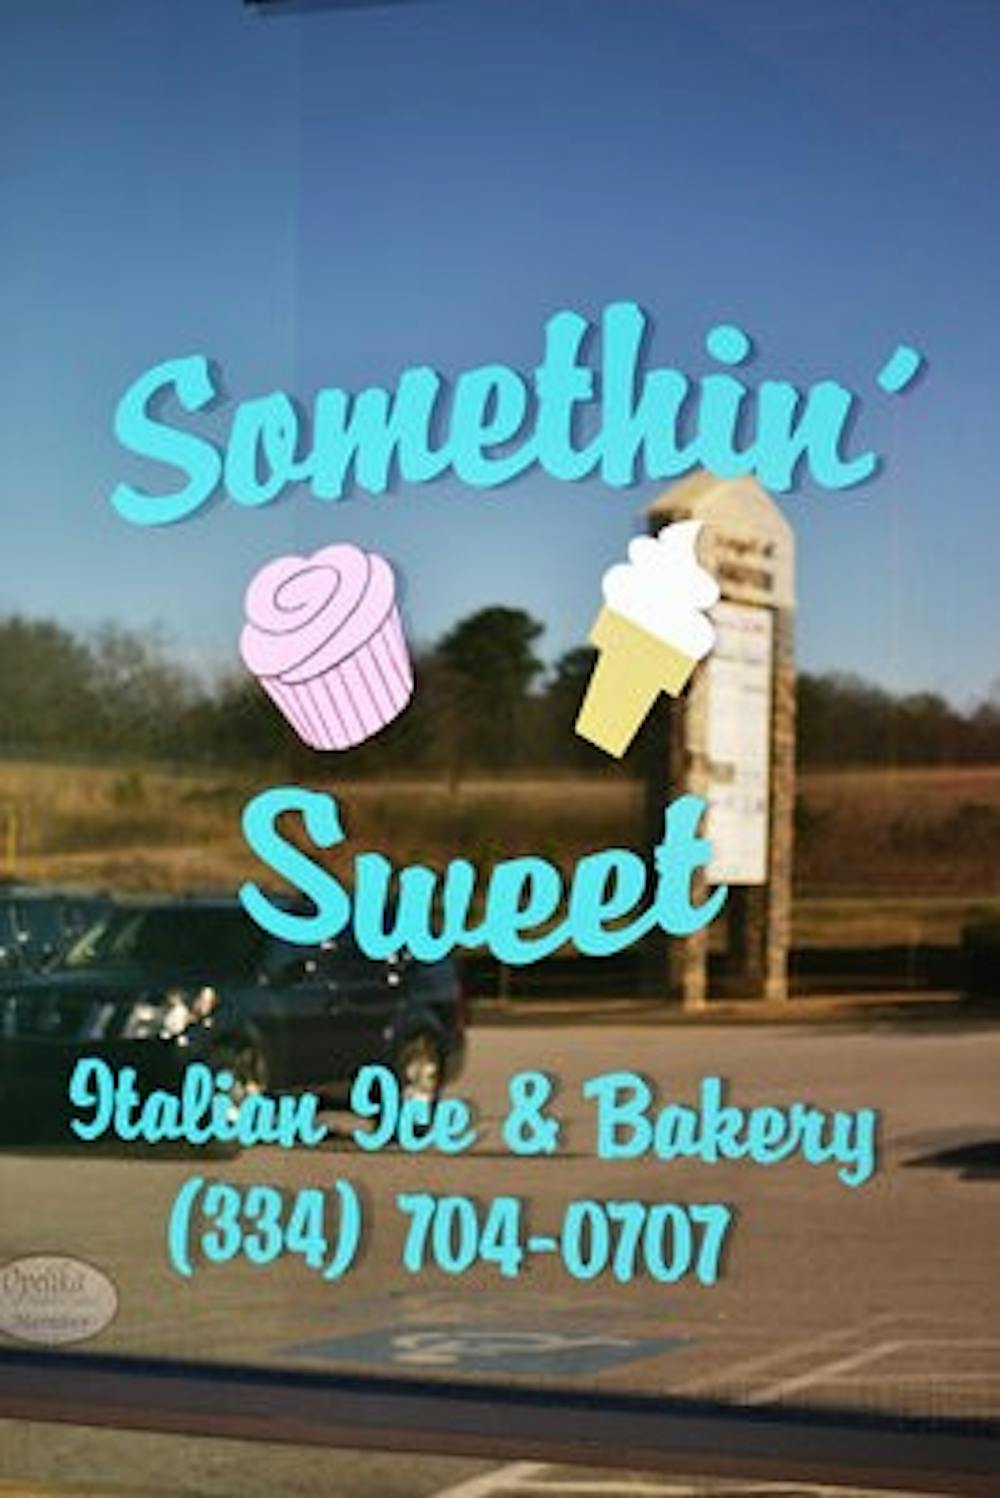 Jerrod and Kristy Woodham own Somethin' Sweet, where Kristy bakes everything by hand. (Raye May / PHOTO EDITOR)